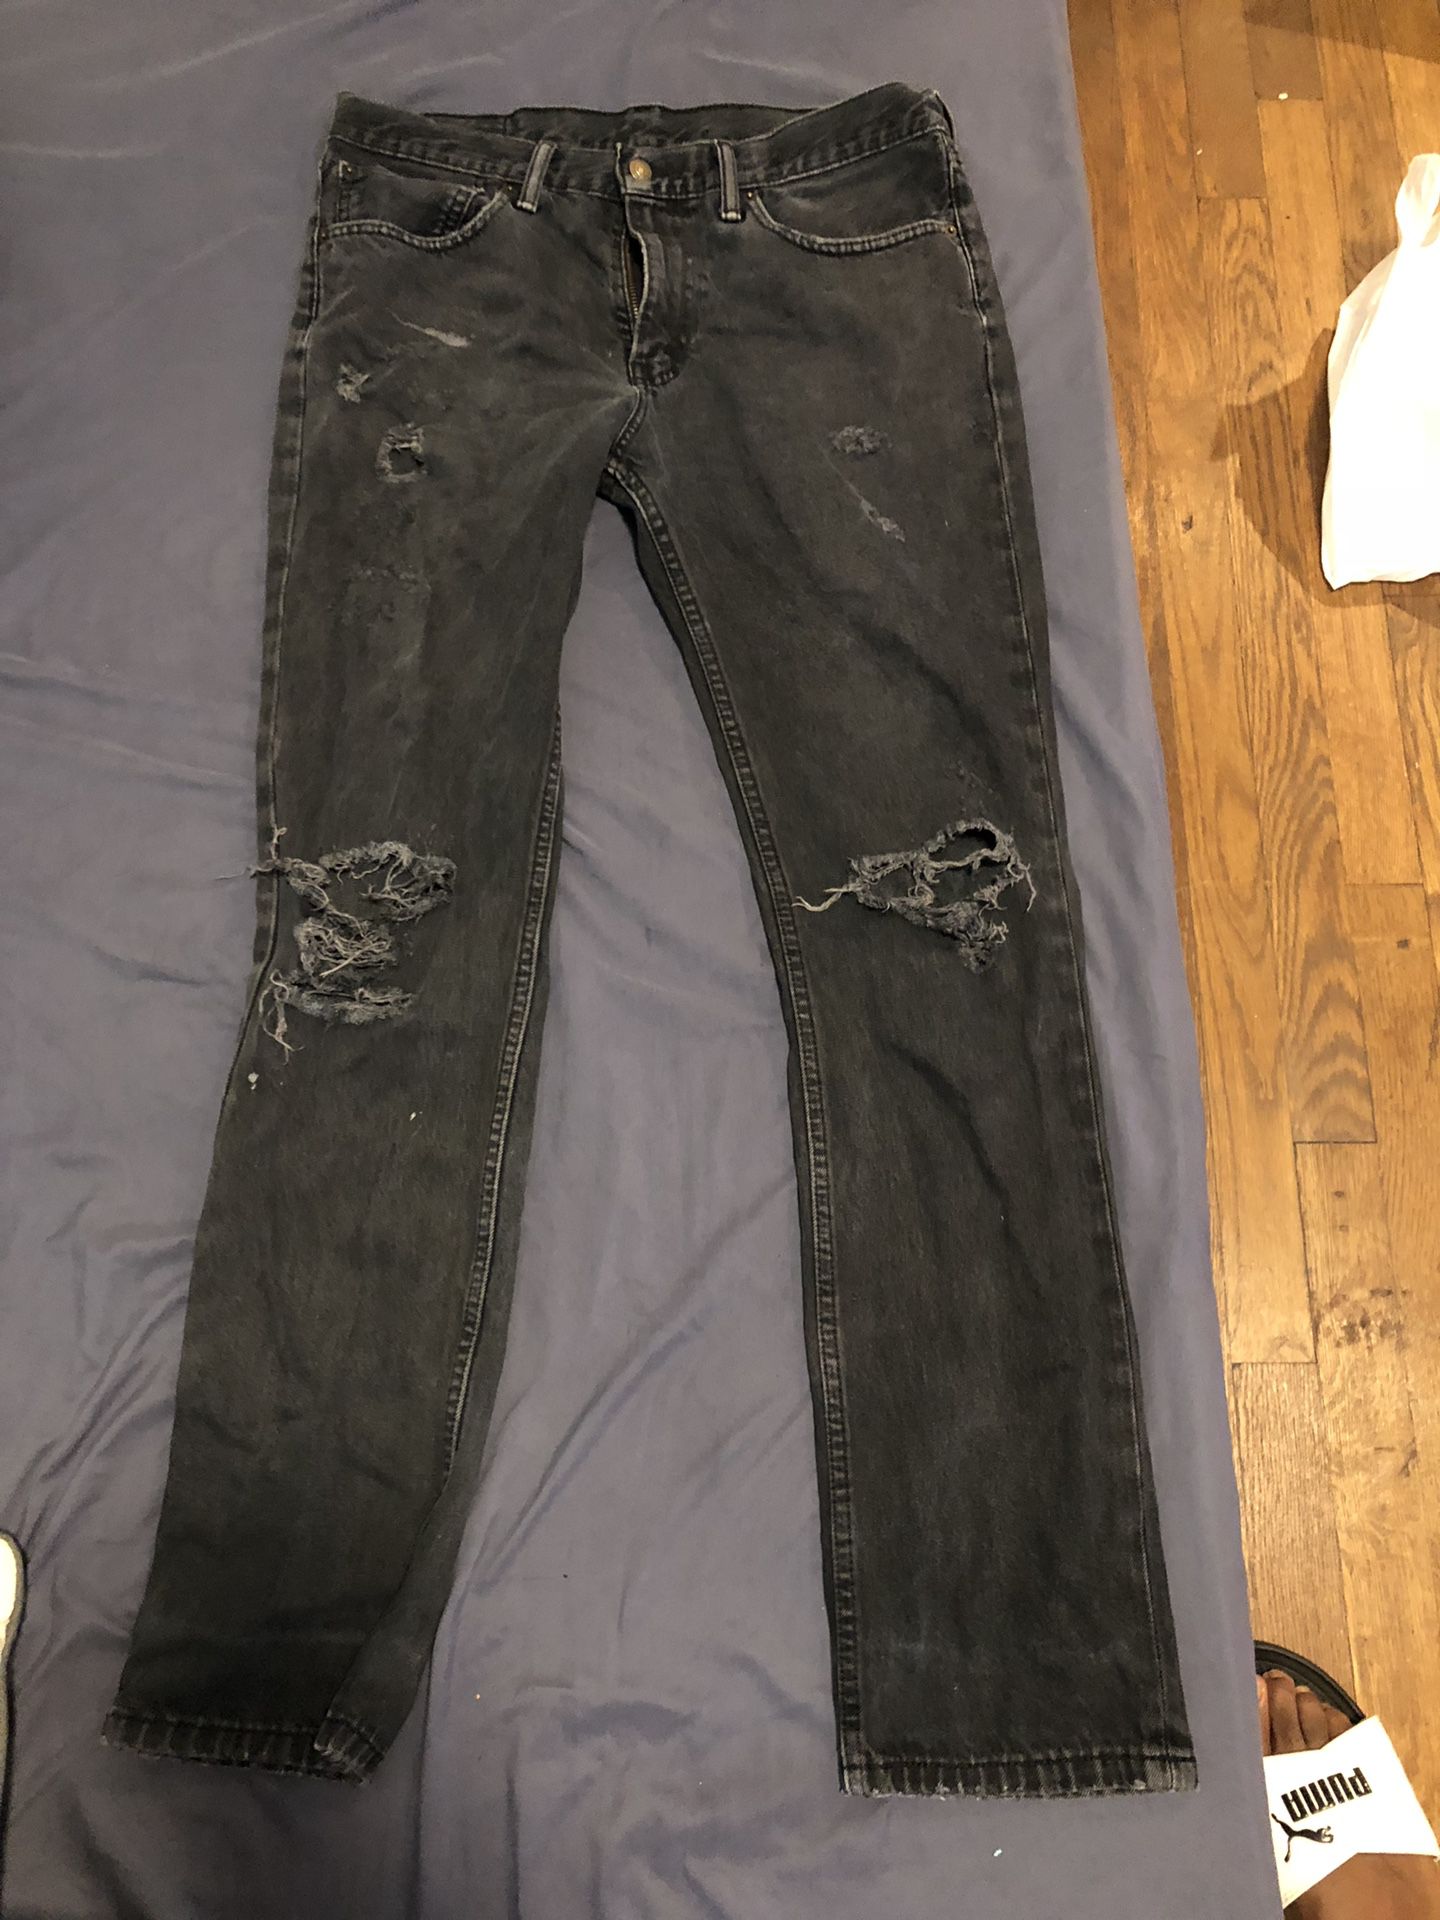 Levi’s 511 slim jeans for sale